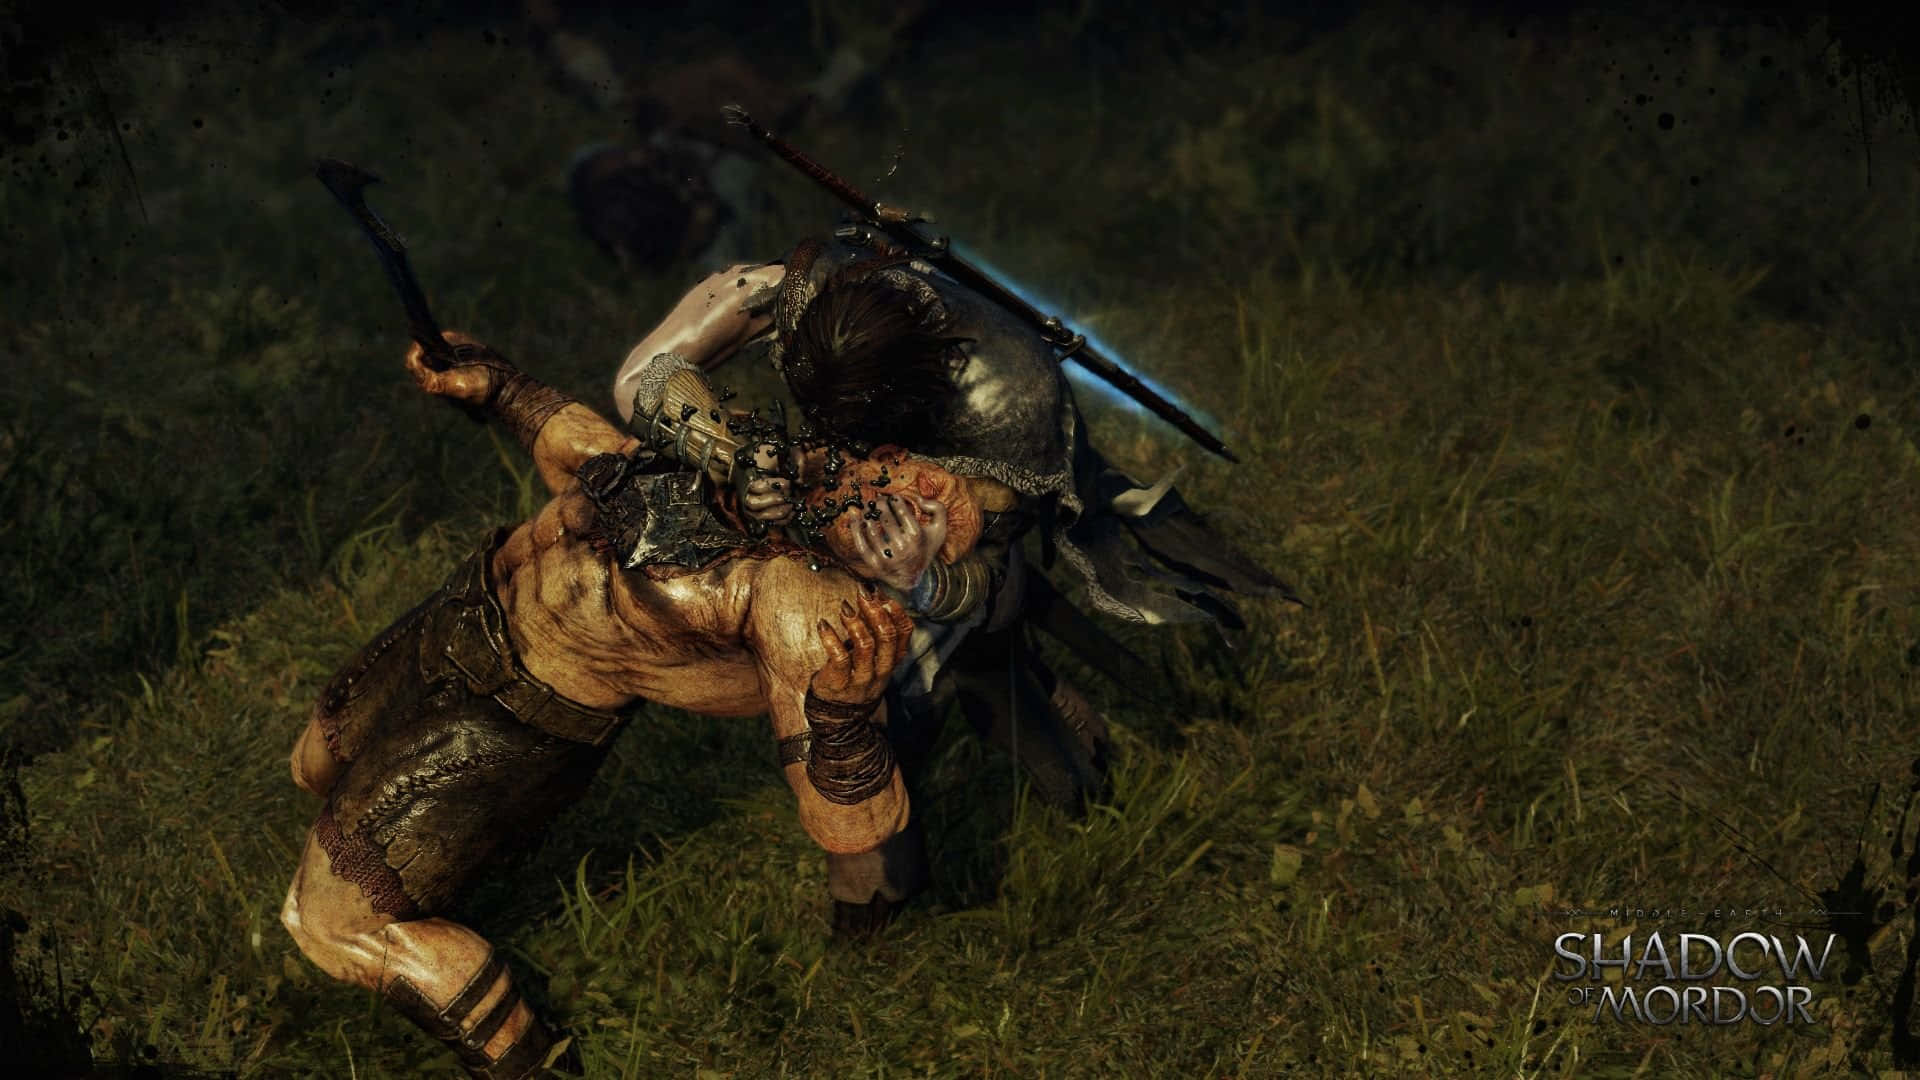 Enjoy in epic battles with Shadow of Mordor